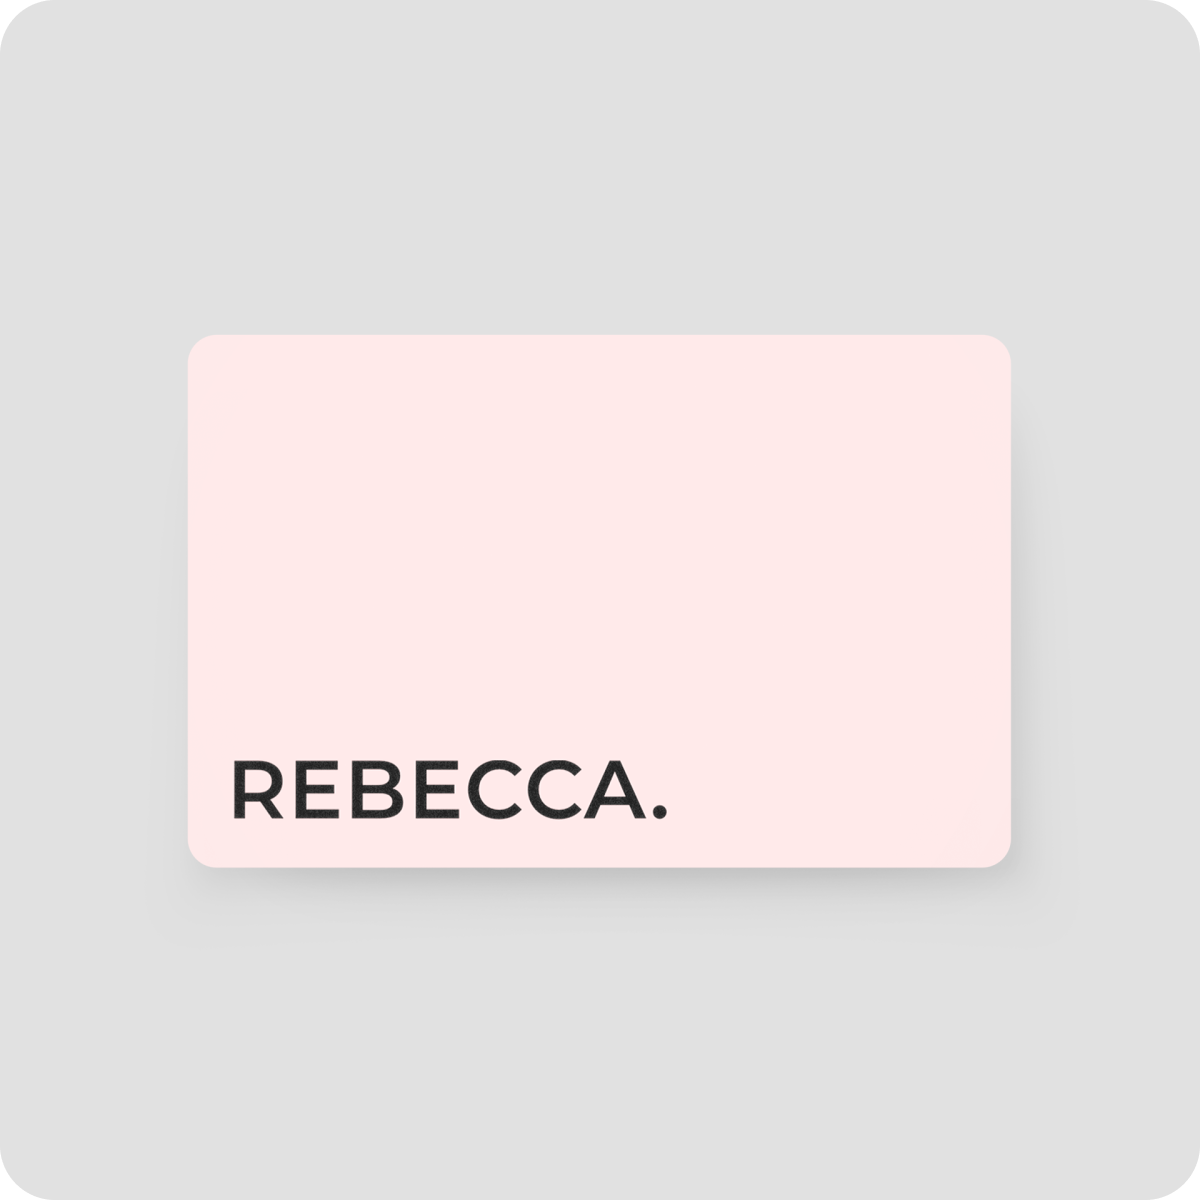 One Good Card: Smart Digital Name Card (Classic) - Personalised Near Field Communication (NFC) Digital Business Cards designs - Baby Pink